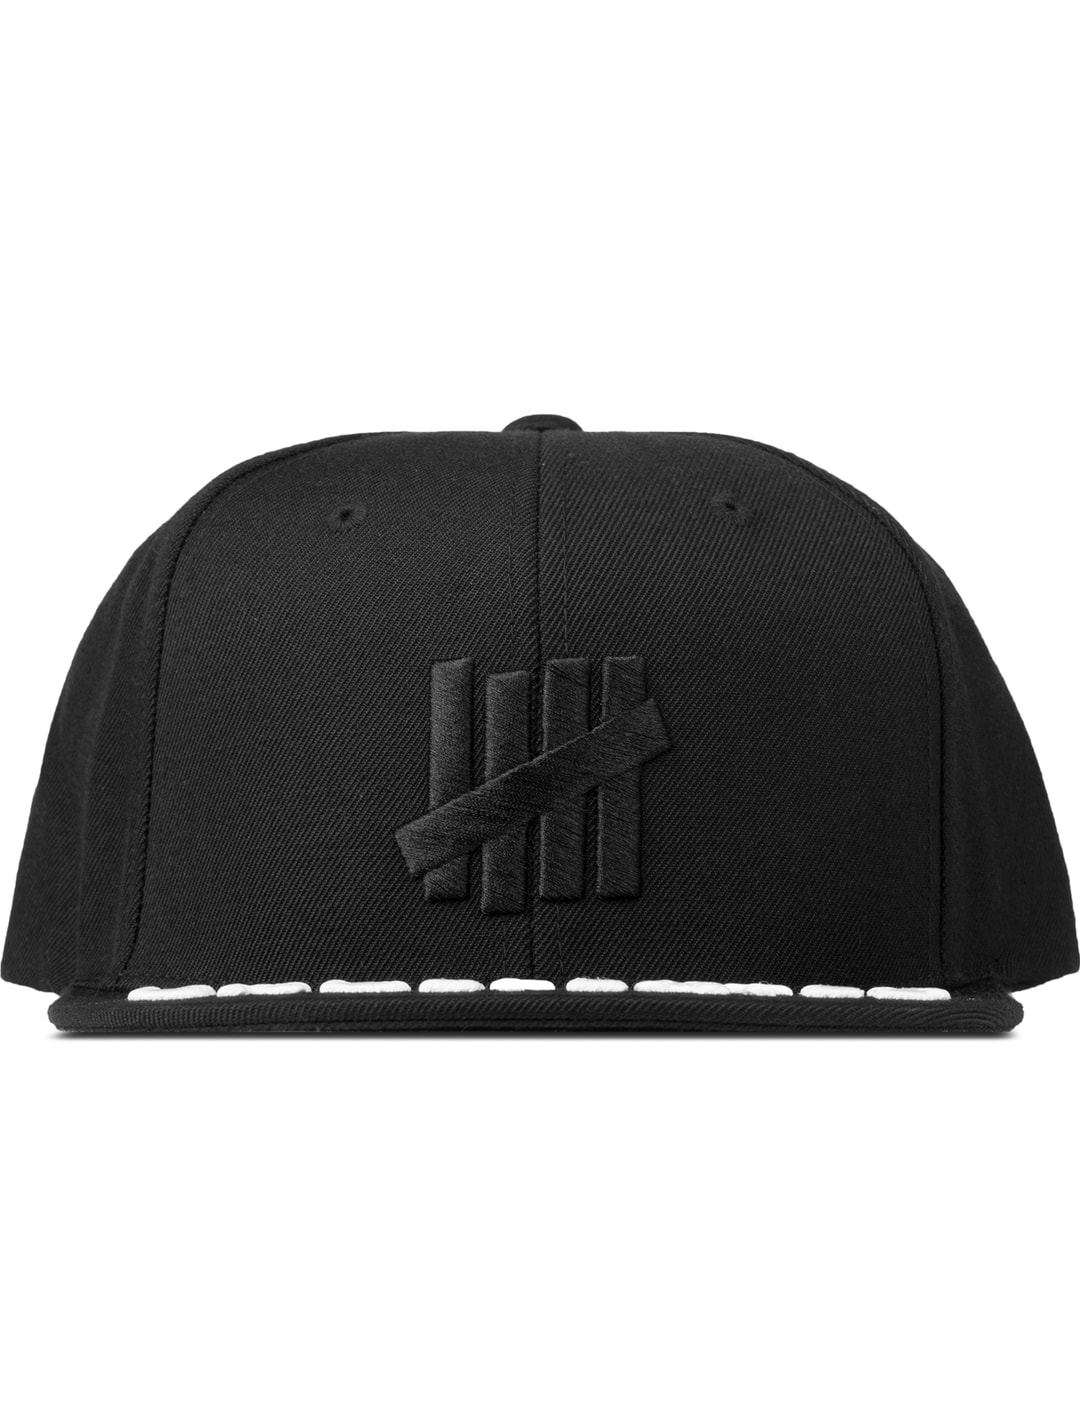 Undefeated - Black 5 Strike Undefeated Cap | HBX - Globally Curated ...